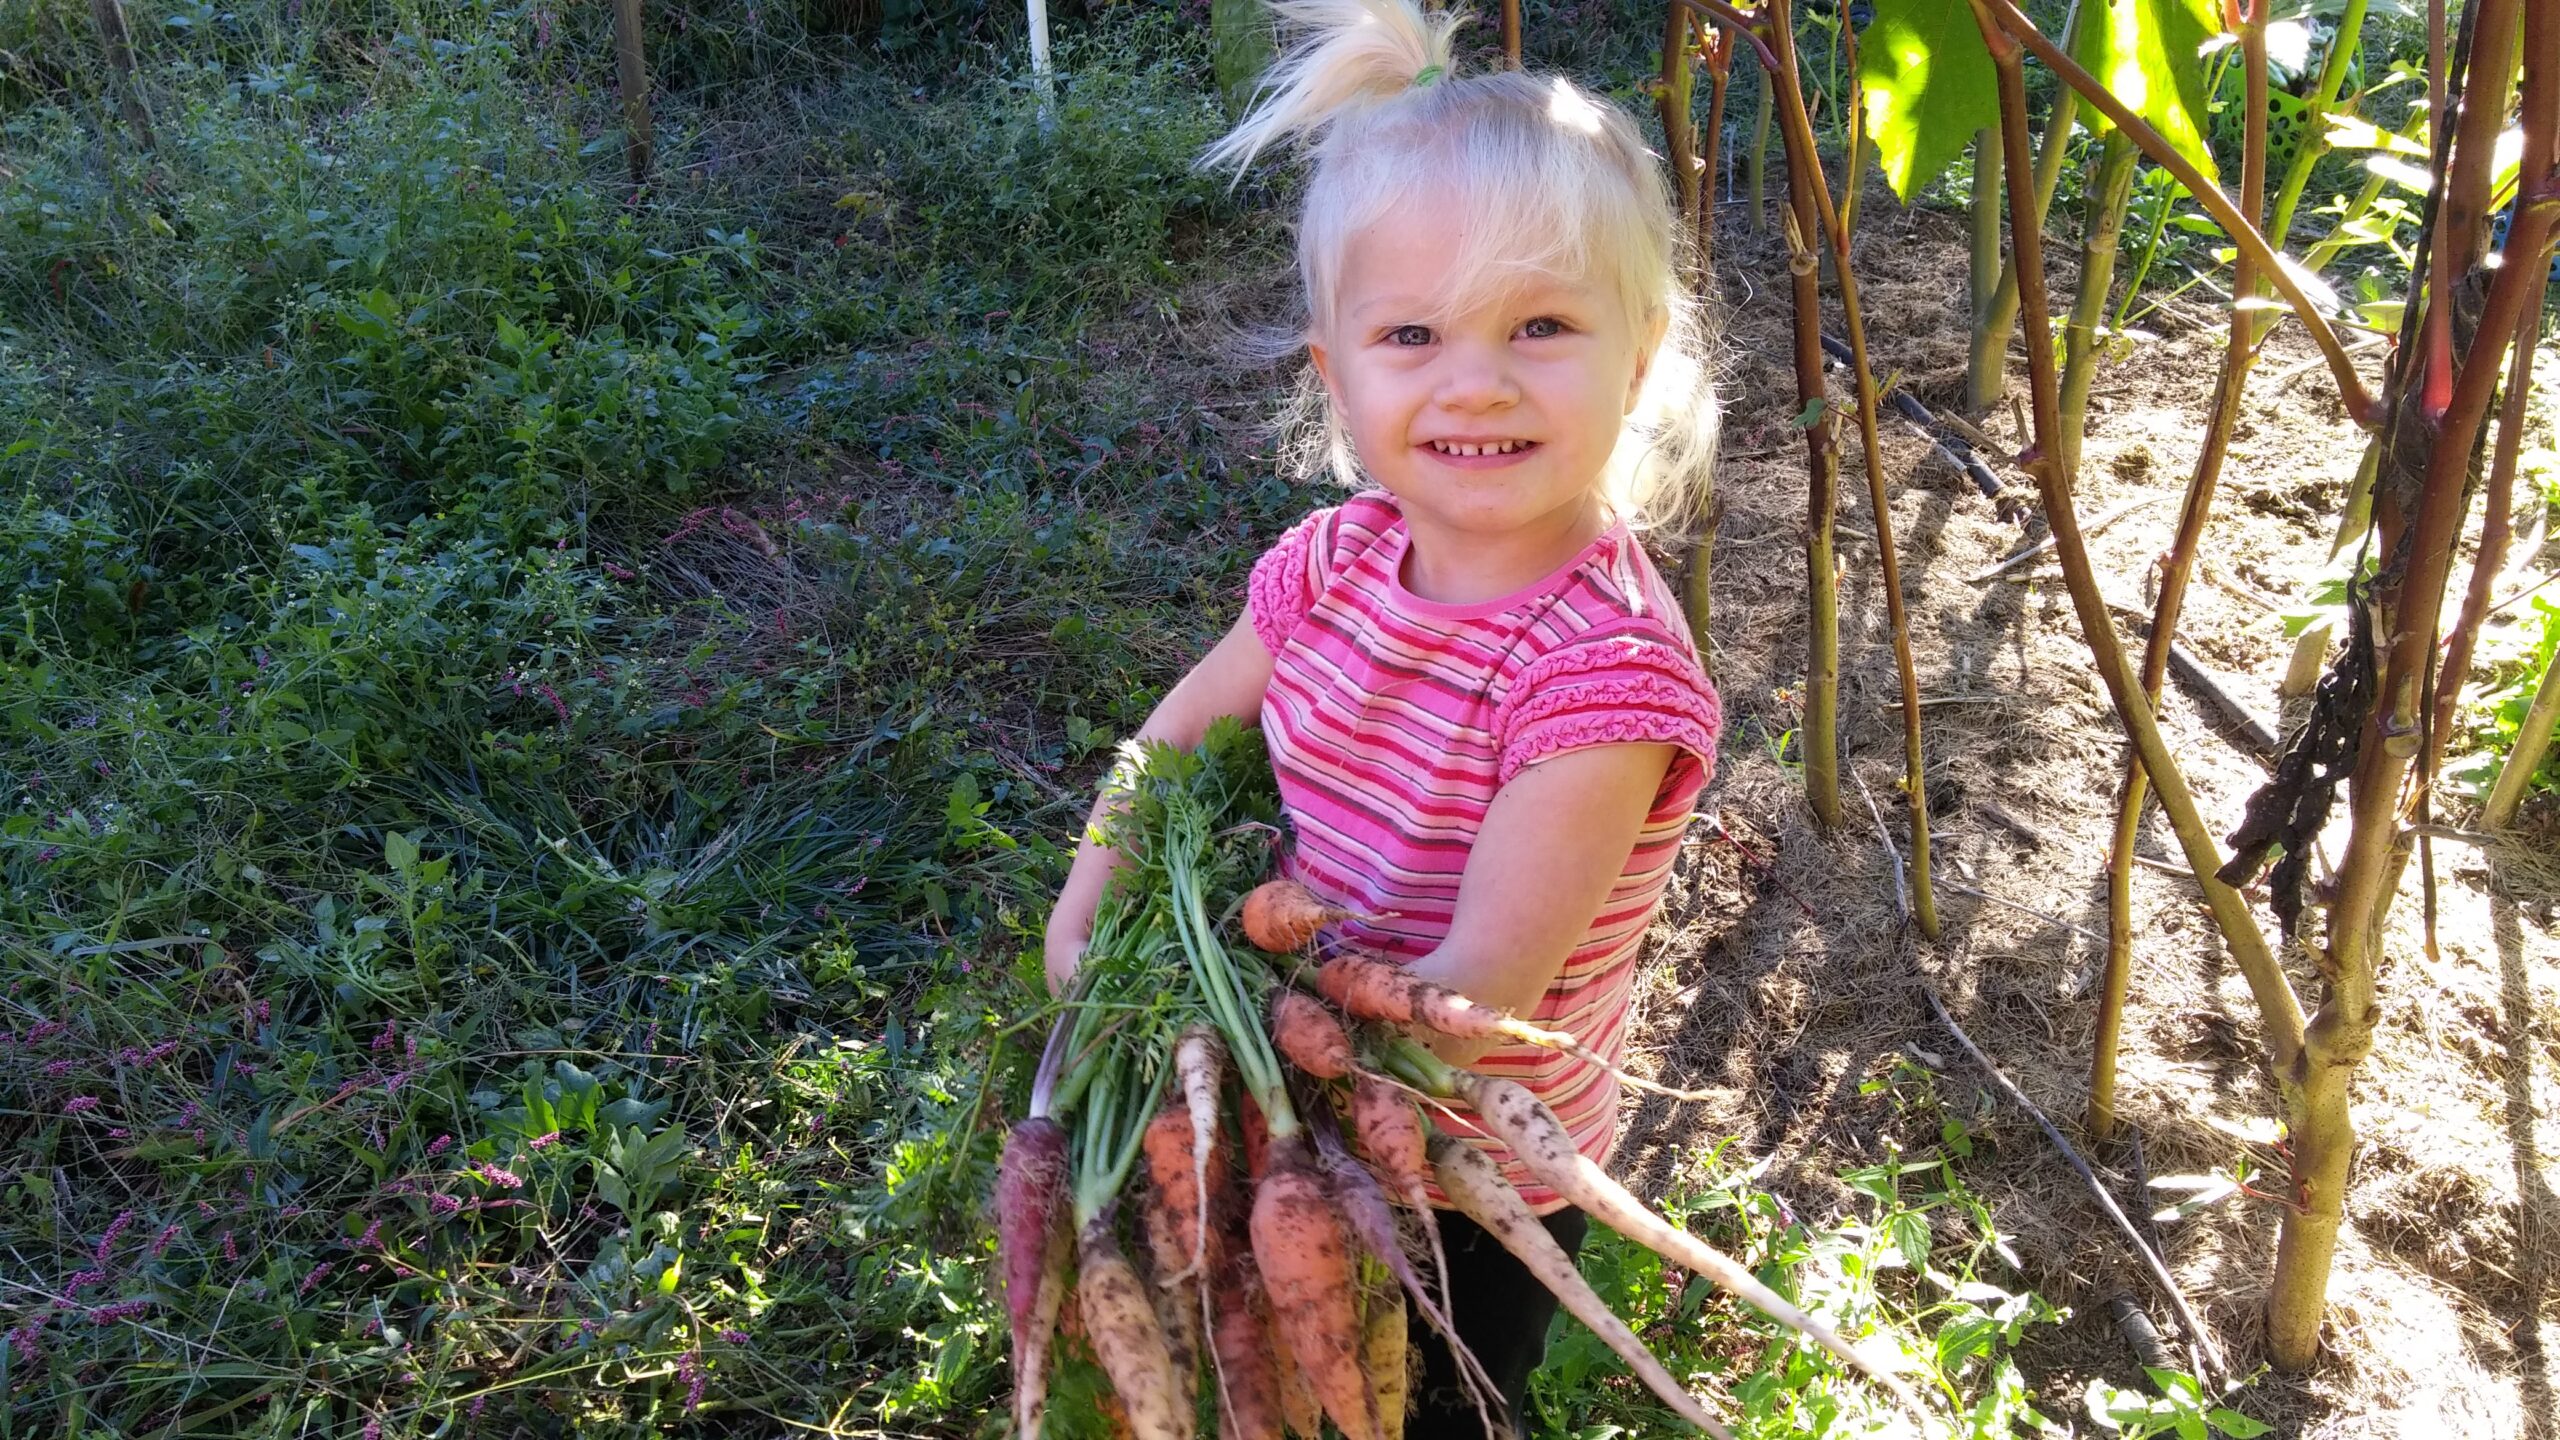 Baby Annalea holding a bunch of Heirloom Carrots picked straight from the garden.